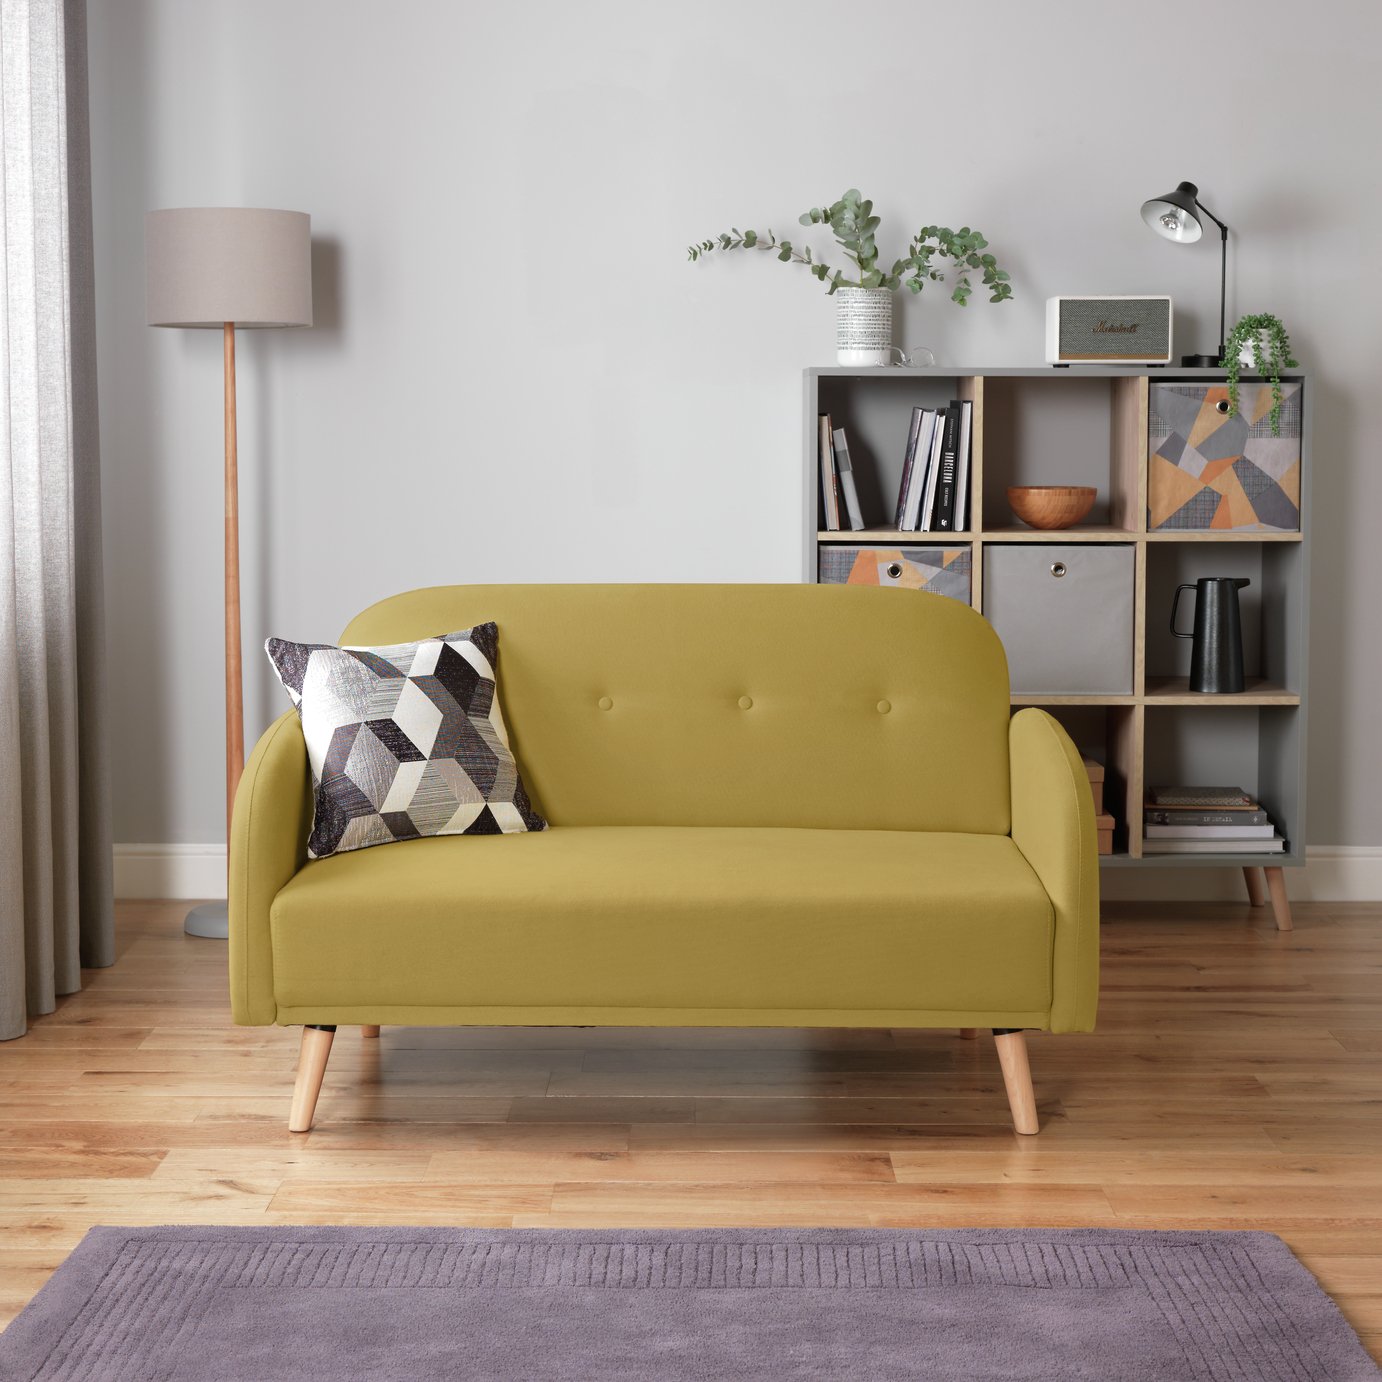 Argos Home Jemima Fabric 2 Seater Sofa in a Box Review